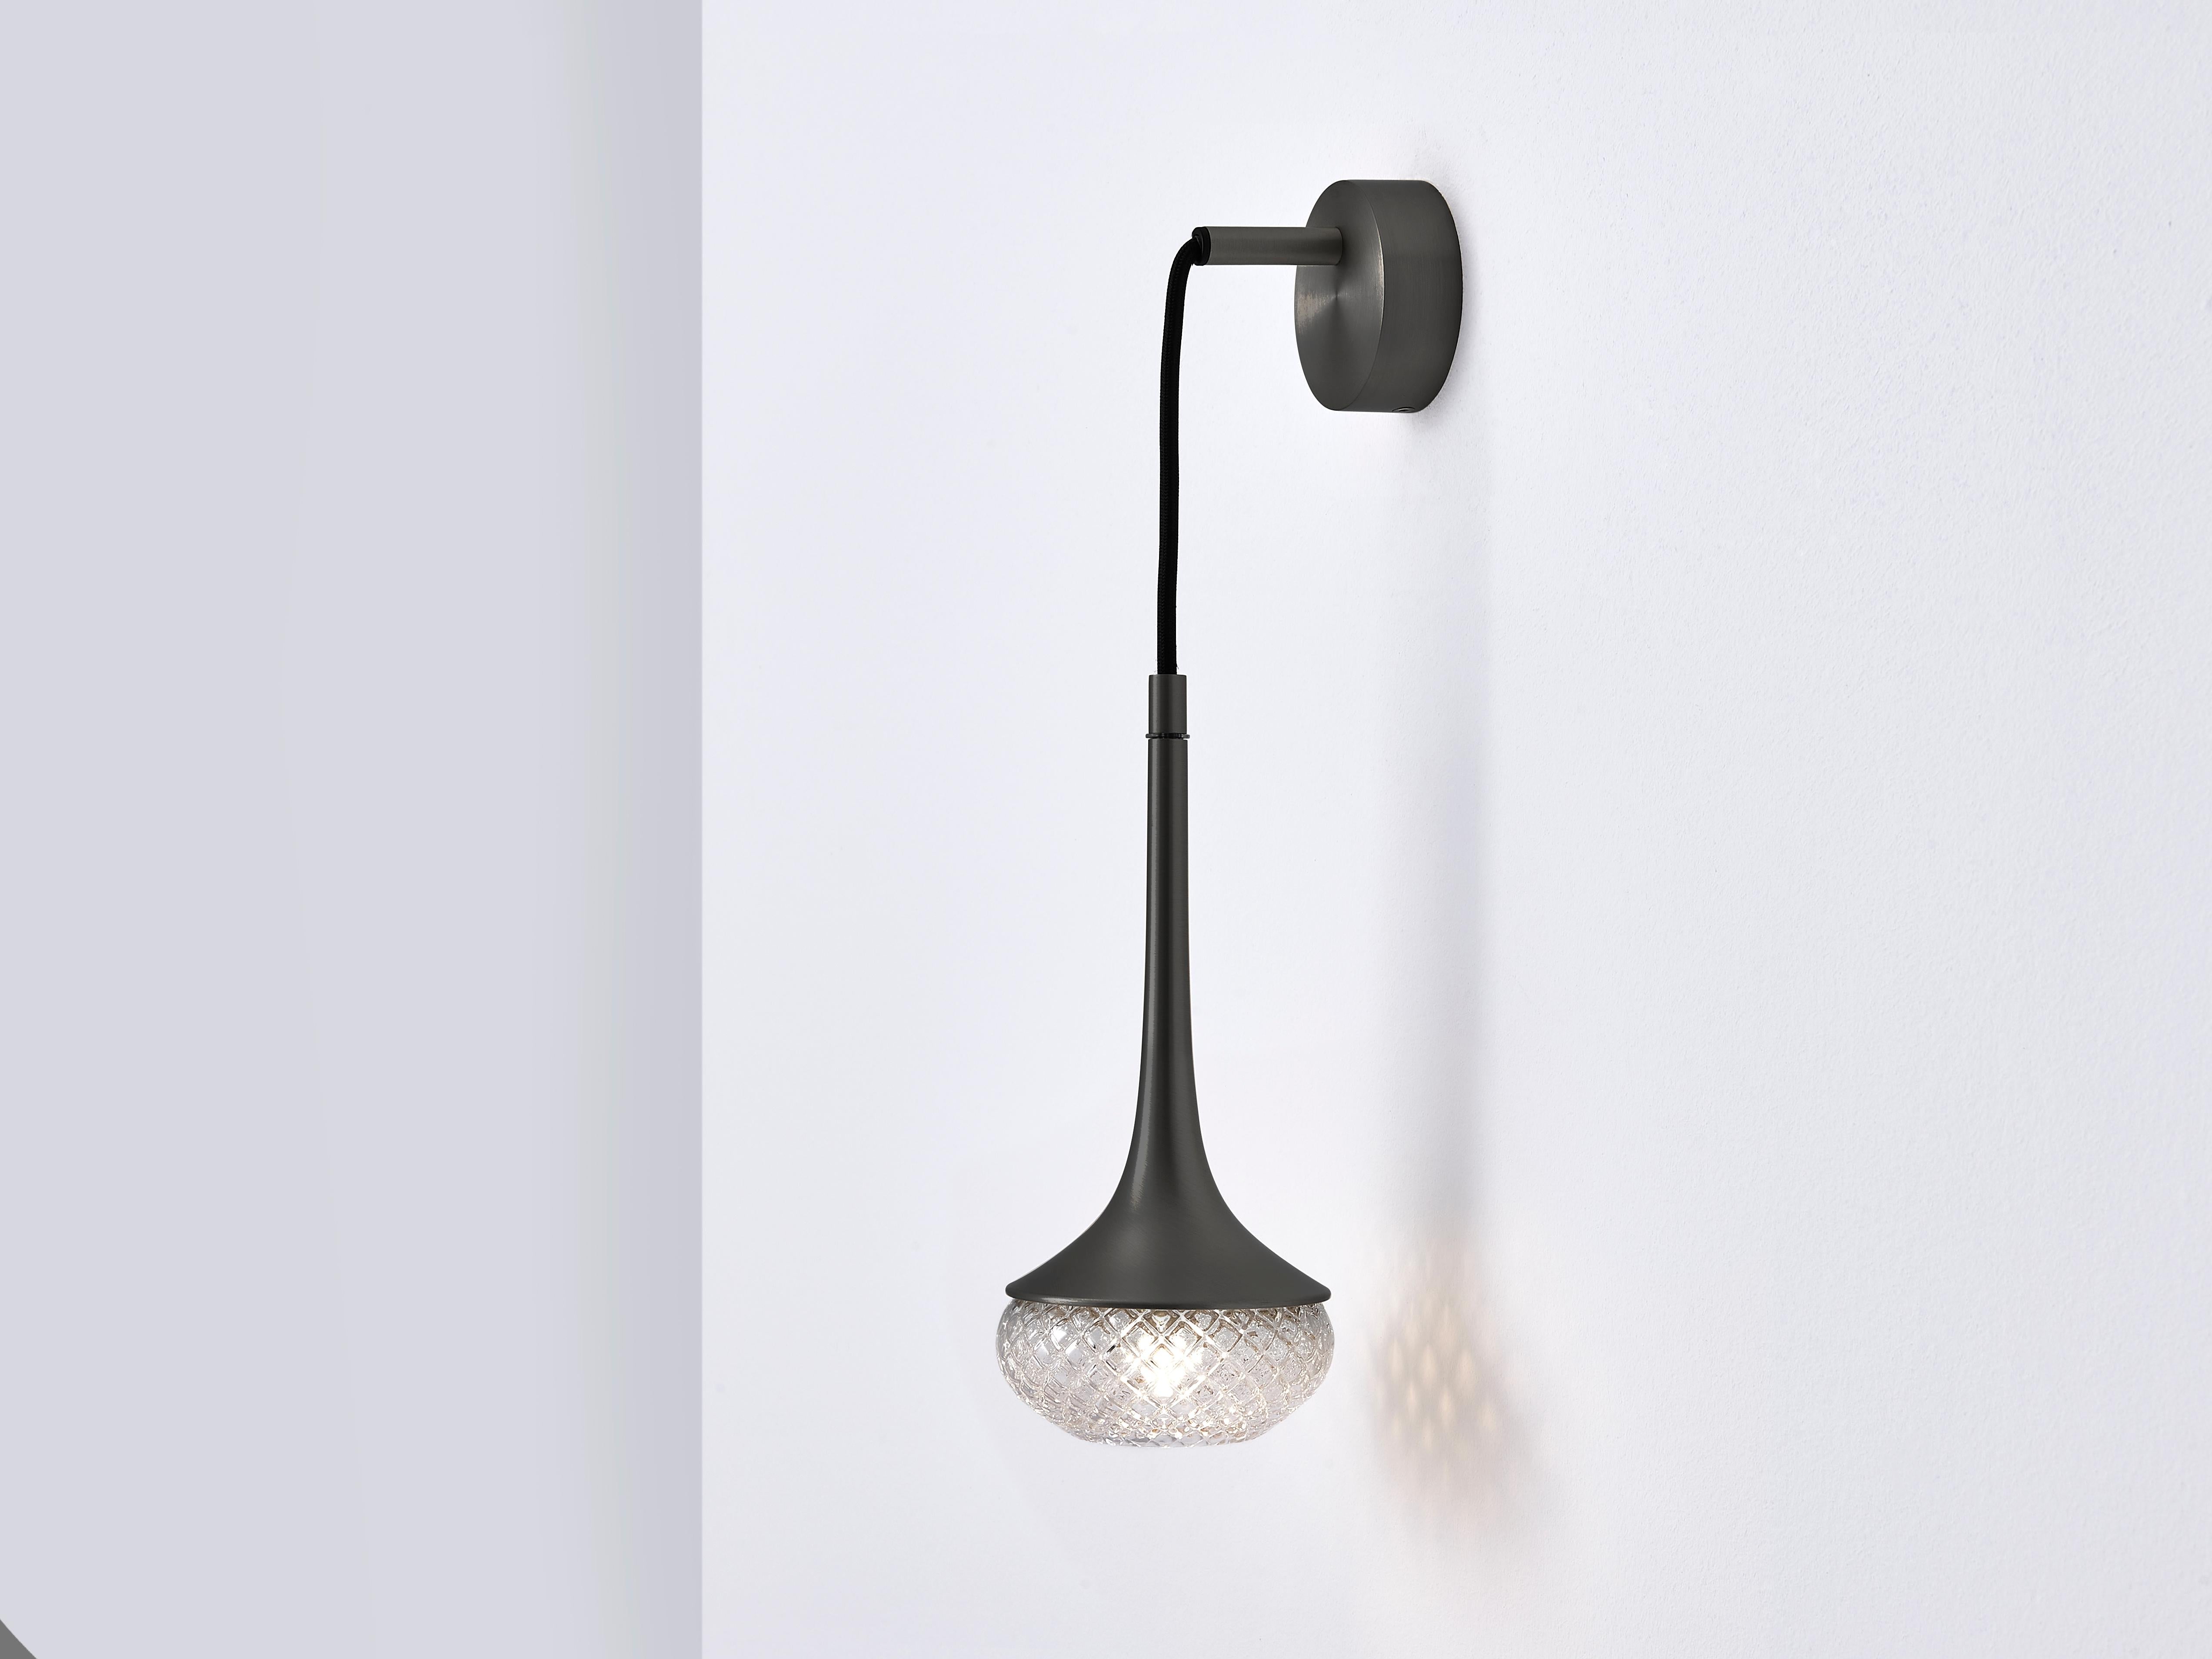 Flea brass wall light by Emilie Cathelineau
Dimensions: D11.5 x W15 X H33.5 cm
Materials: Solid brass,Mouth-blown glass,Textile cable
Others finishes and dimensions are available.

All our lamps can be wired according to each country. If sold